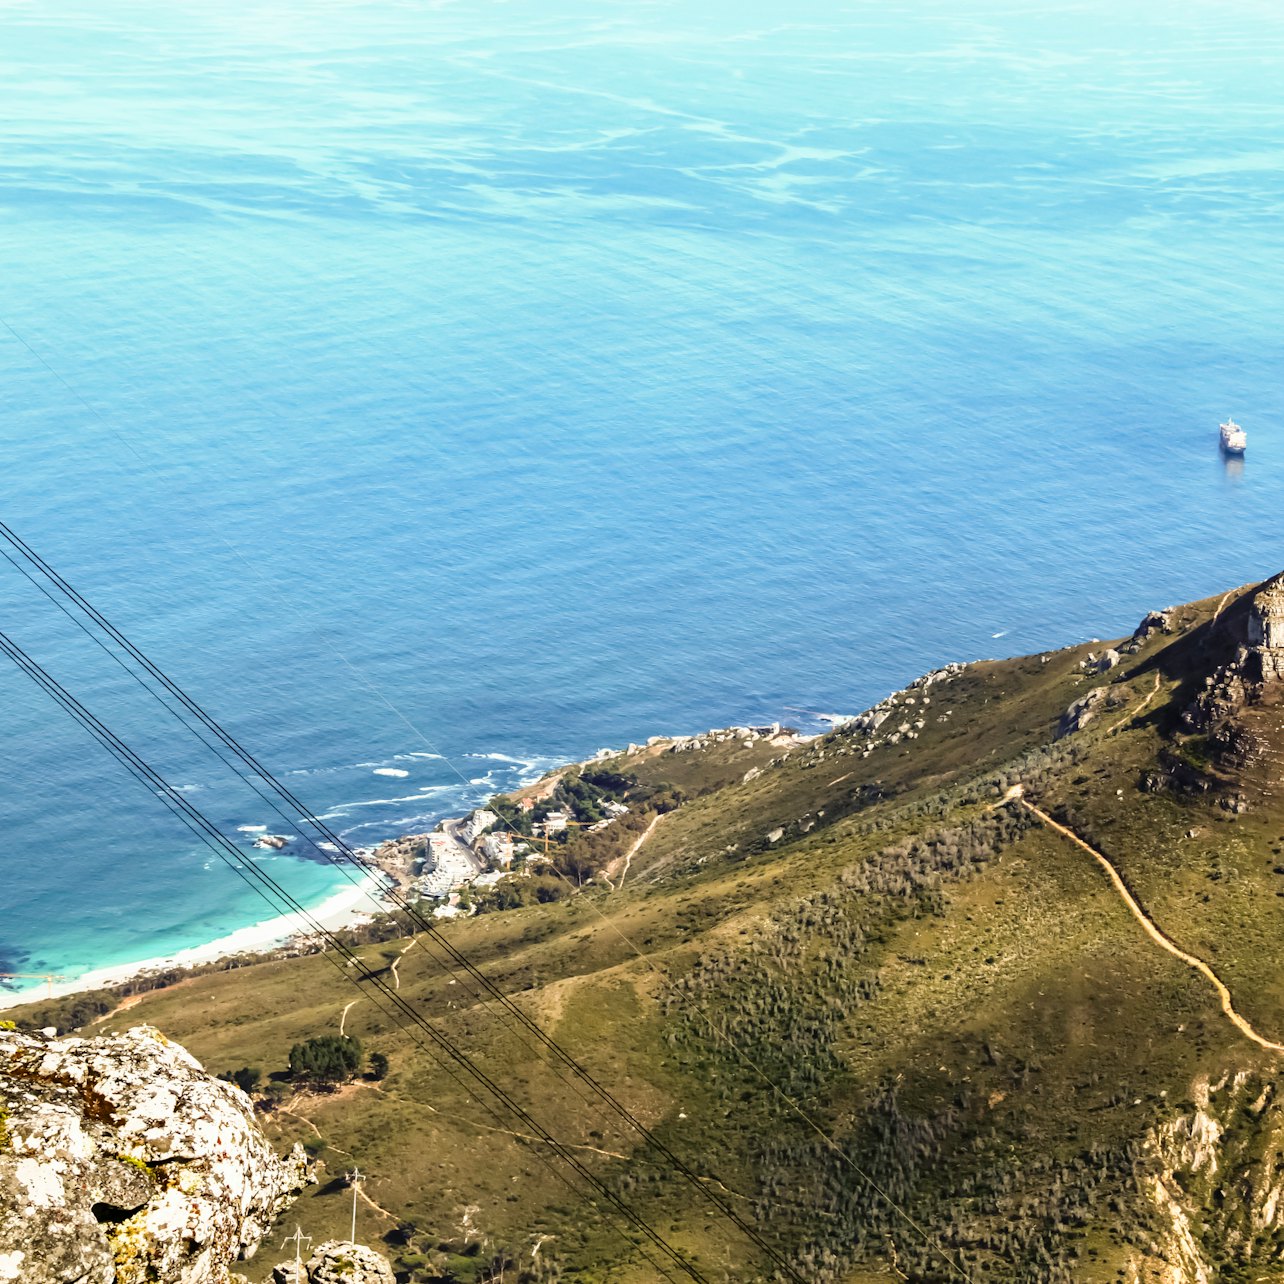 Hop-on Hop-off Bus Cape Town & Table Mountain Aerial Cableway - Accommodations in Cape Town